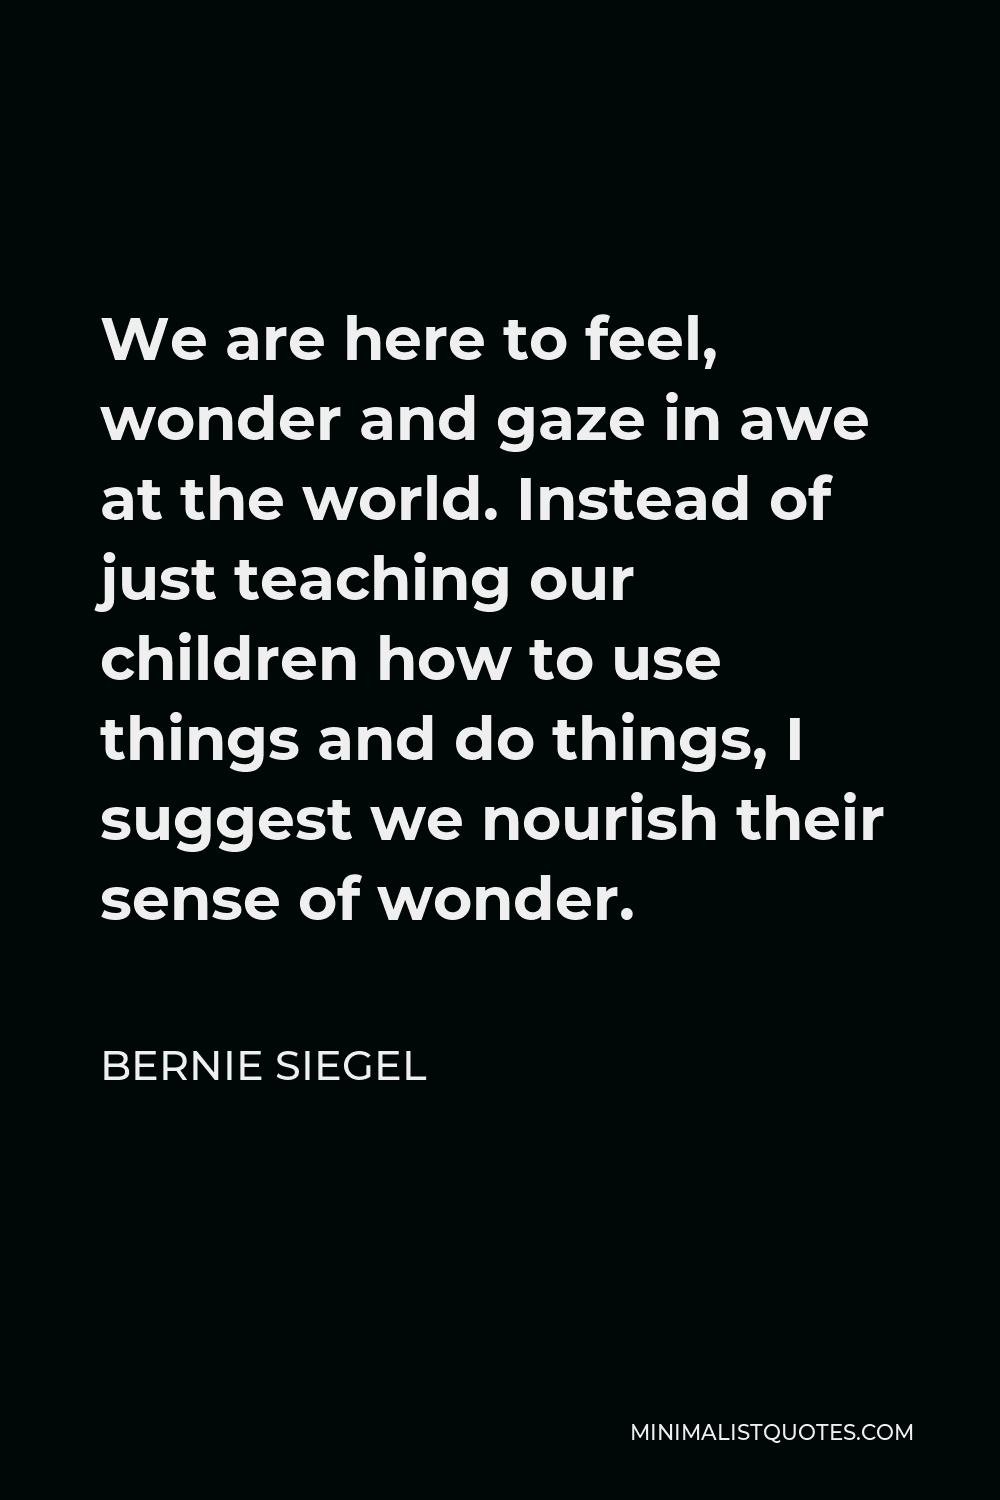 Bernie Siegel Quote - We are here to feel, wonder and gaze in awe at the world. Instead of just teaching our children how to use things and do things, I suggest we nourish their sense of wonder.